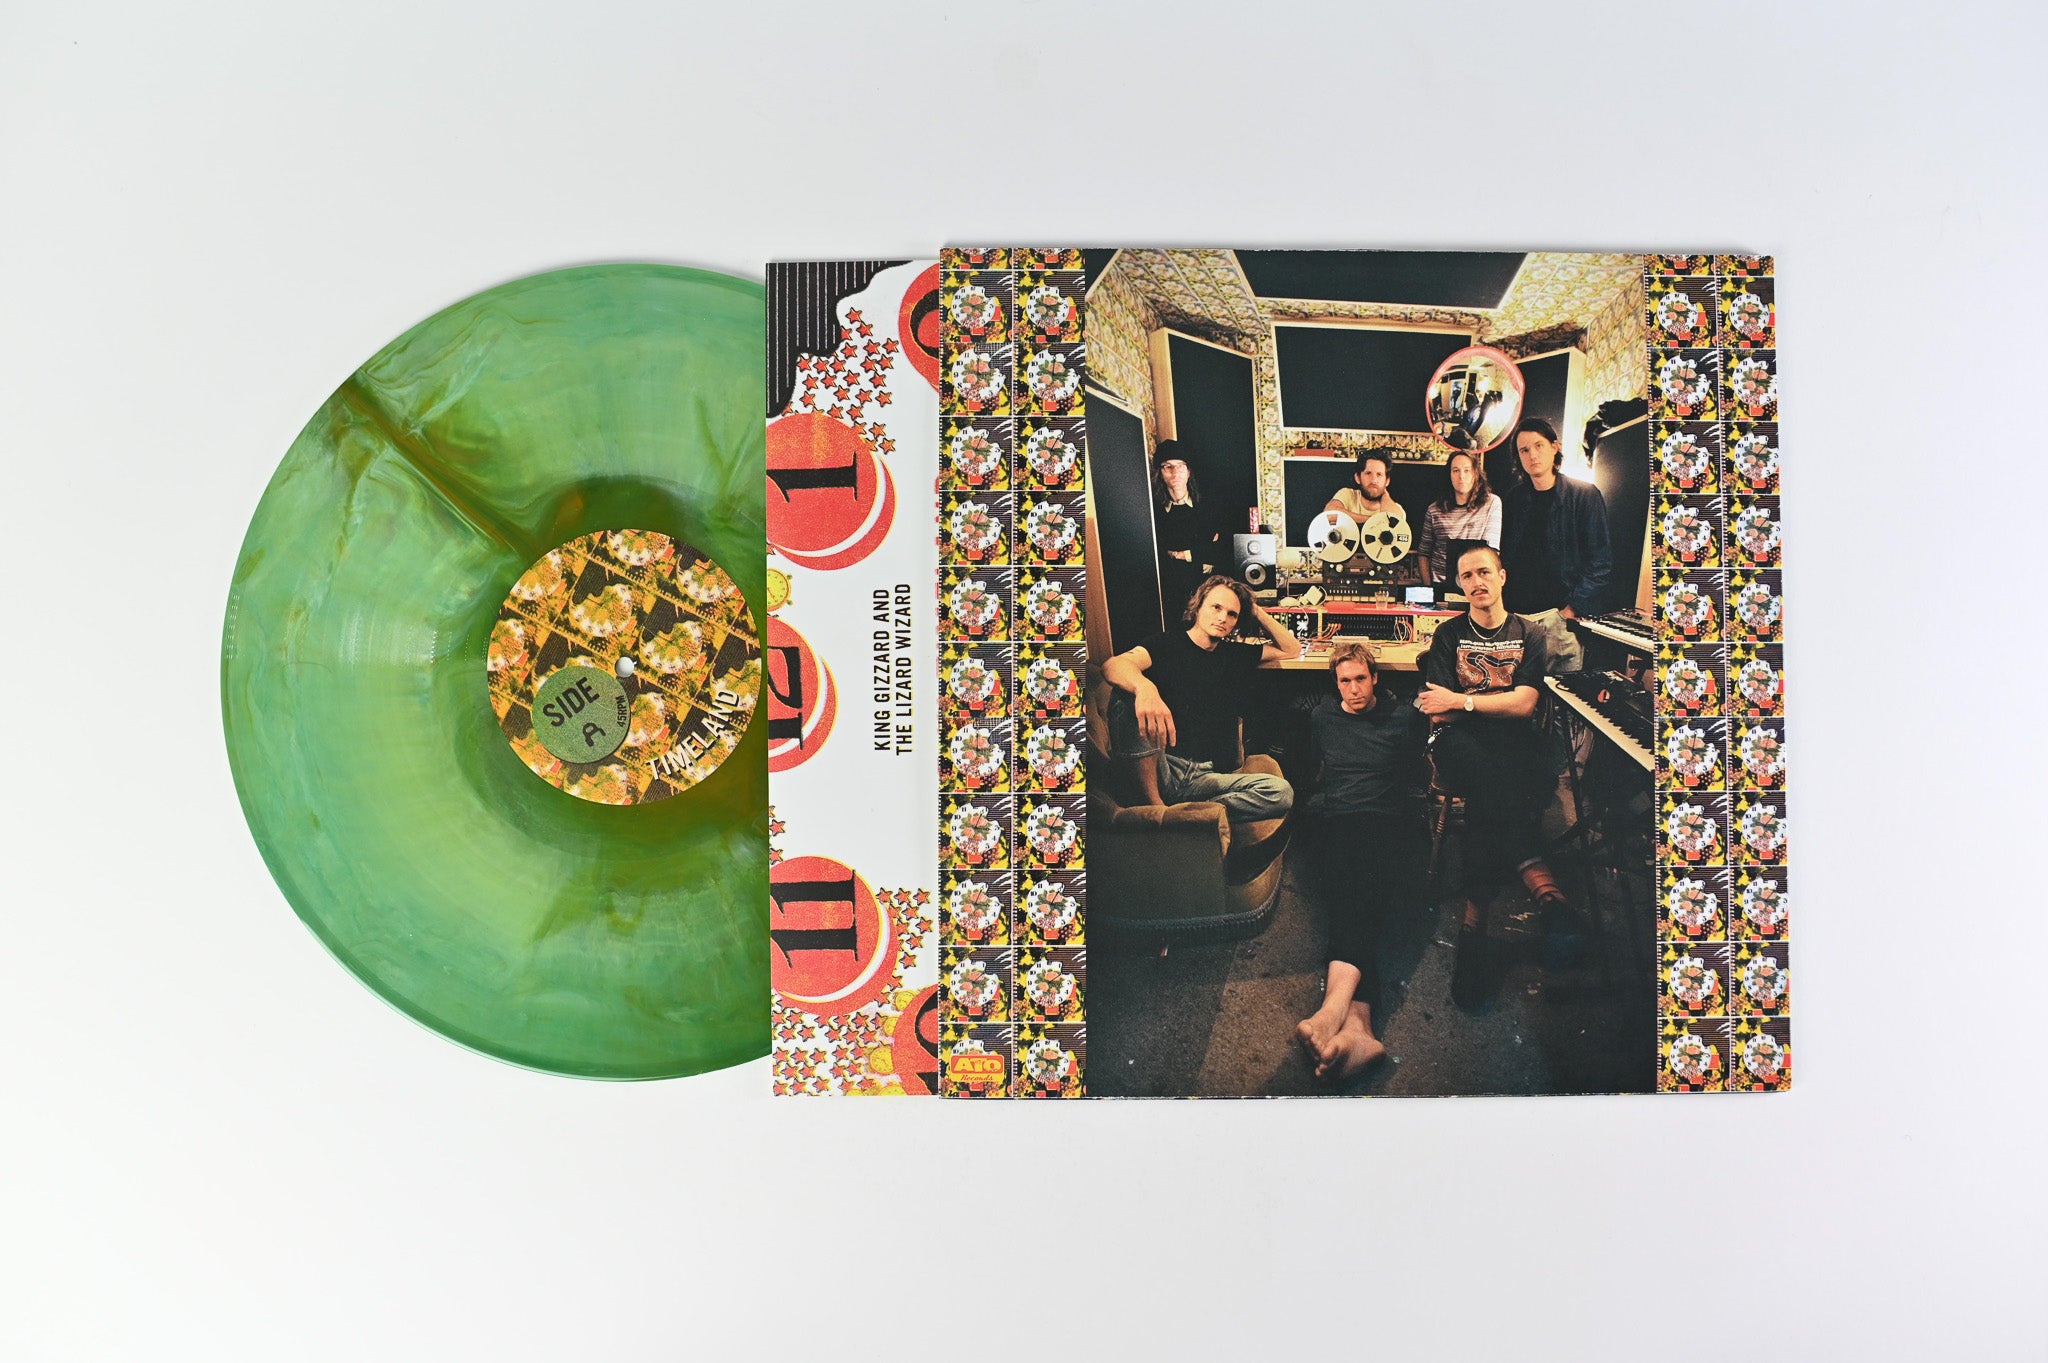 King Gizzard And The Lizard Wizard - Made In Timeland on ATO Ltd Green/Yellow Marbled